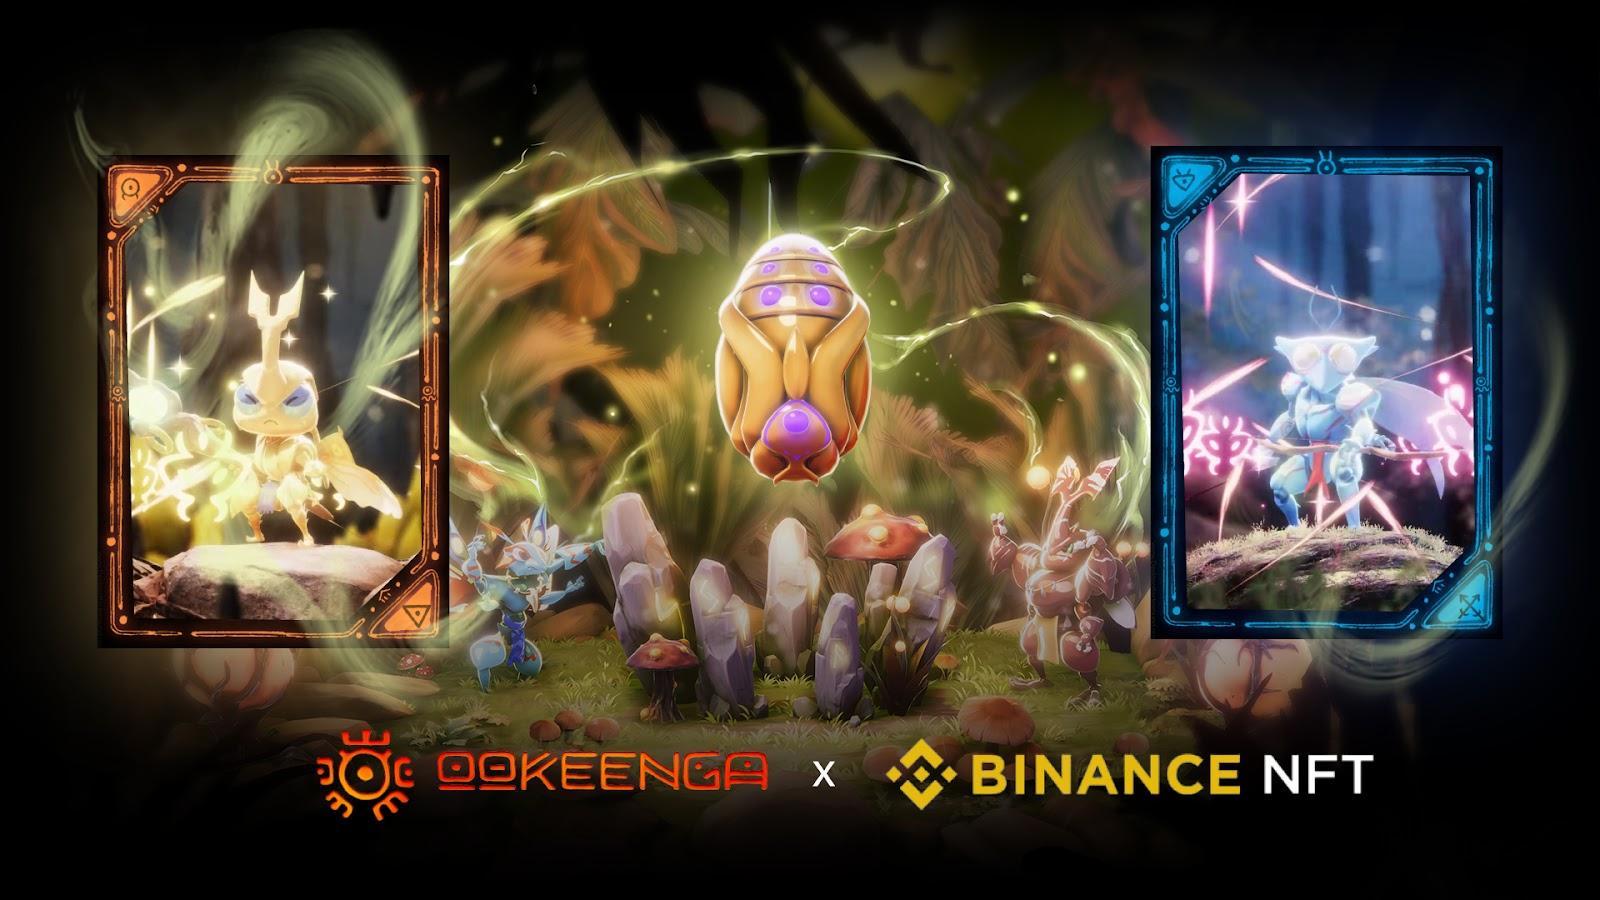 , Real Time Strategy Battle of Insects Game Ookeenga to Launch NFT Collection on Binance NFT